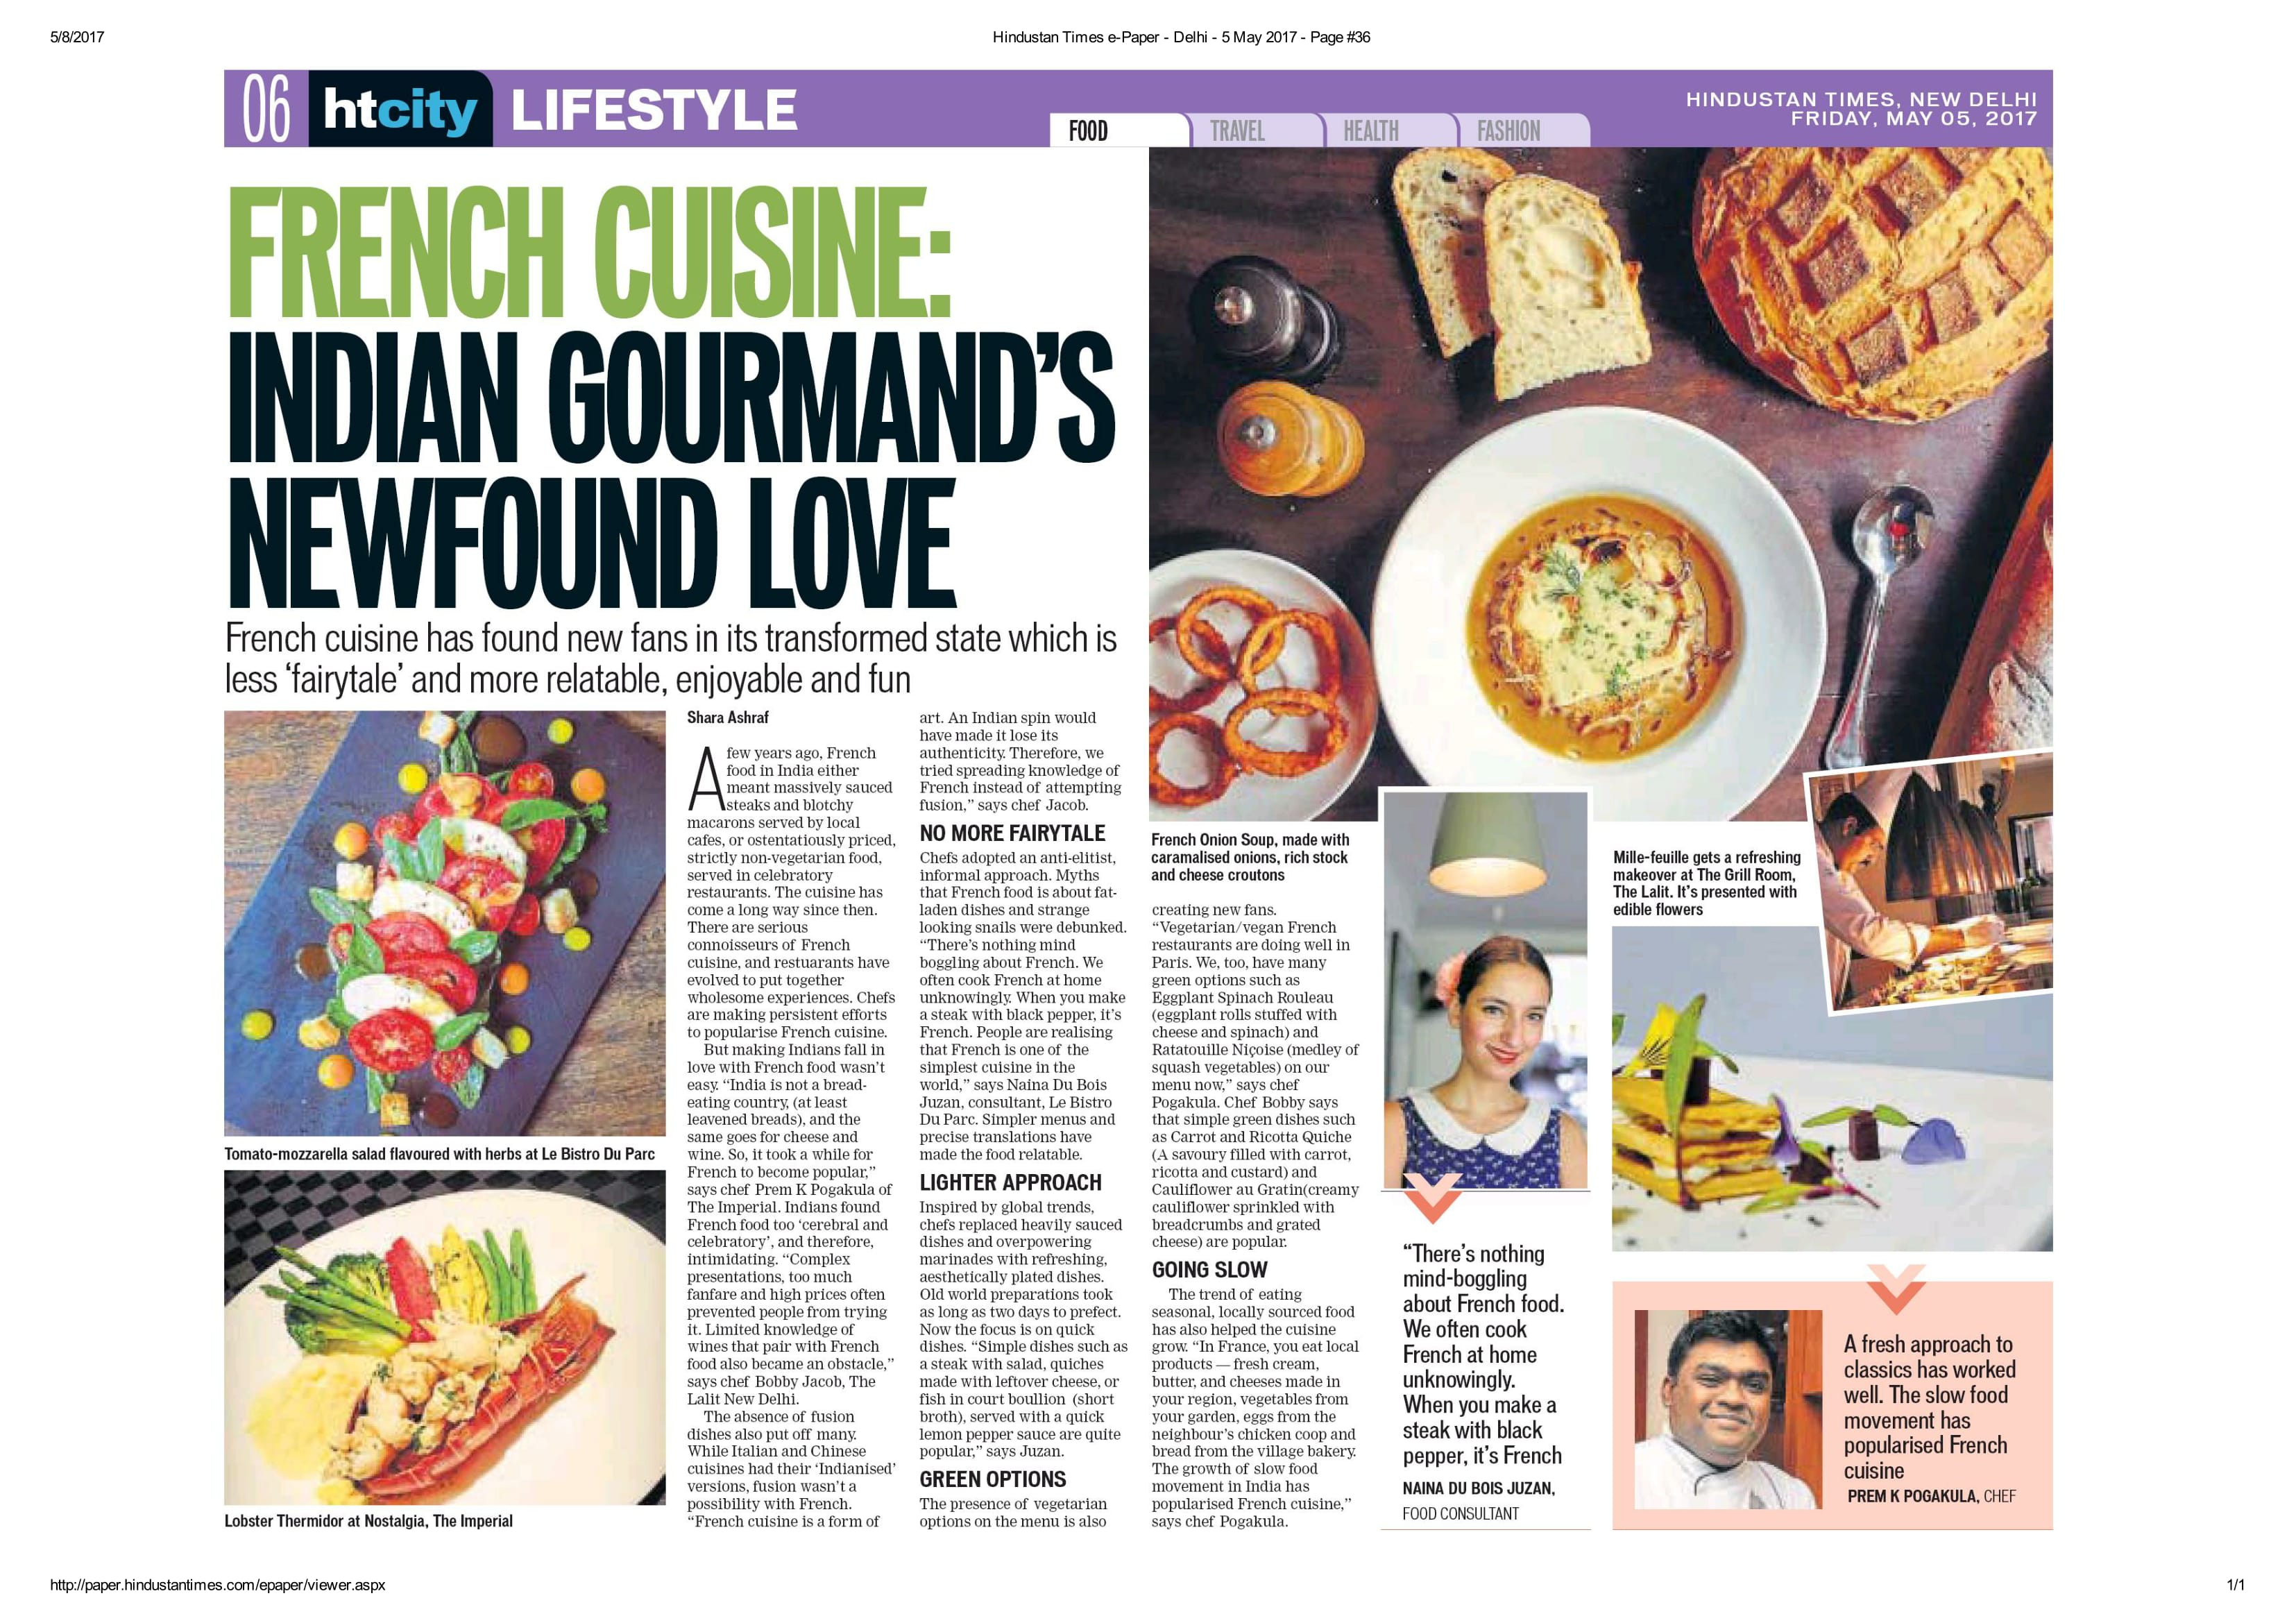 French Cuisine: Indian Gourmand's Newfound Love